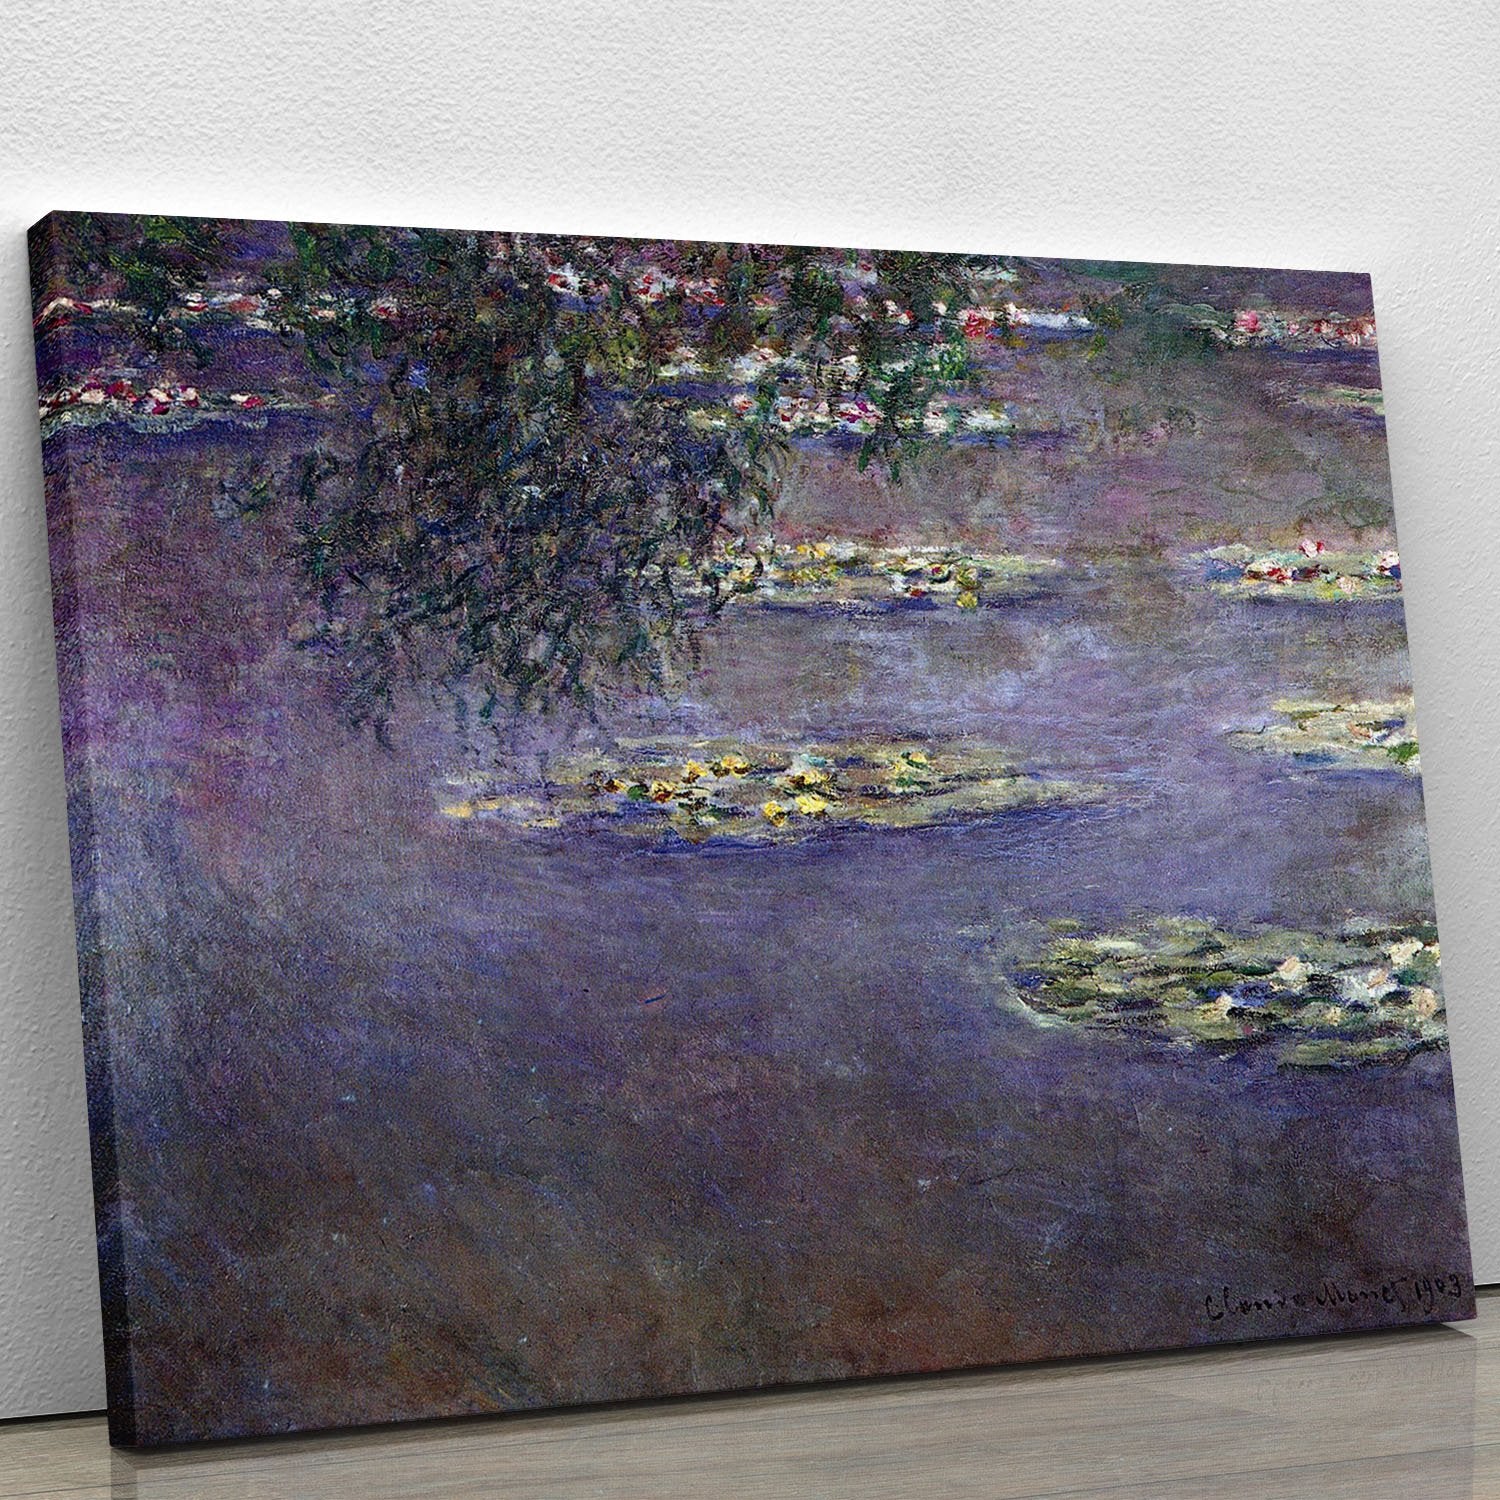 Water lilies water landscape 1 by Monet Canvas Print or Poster